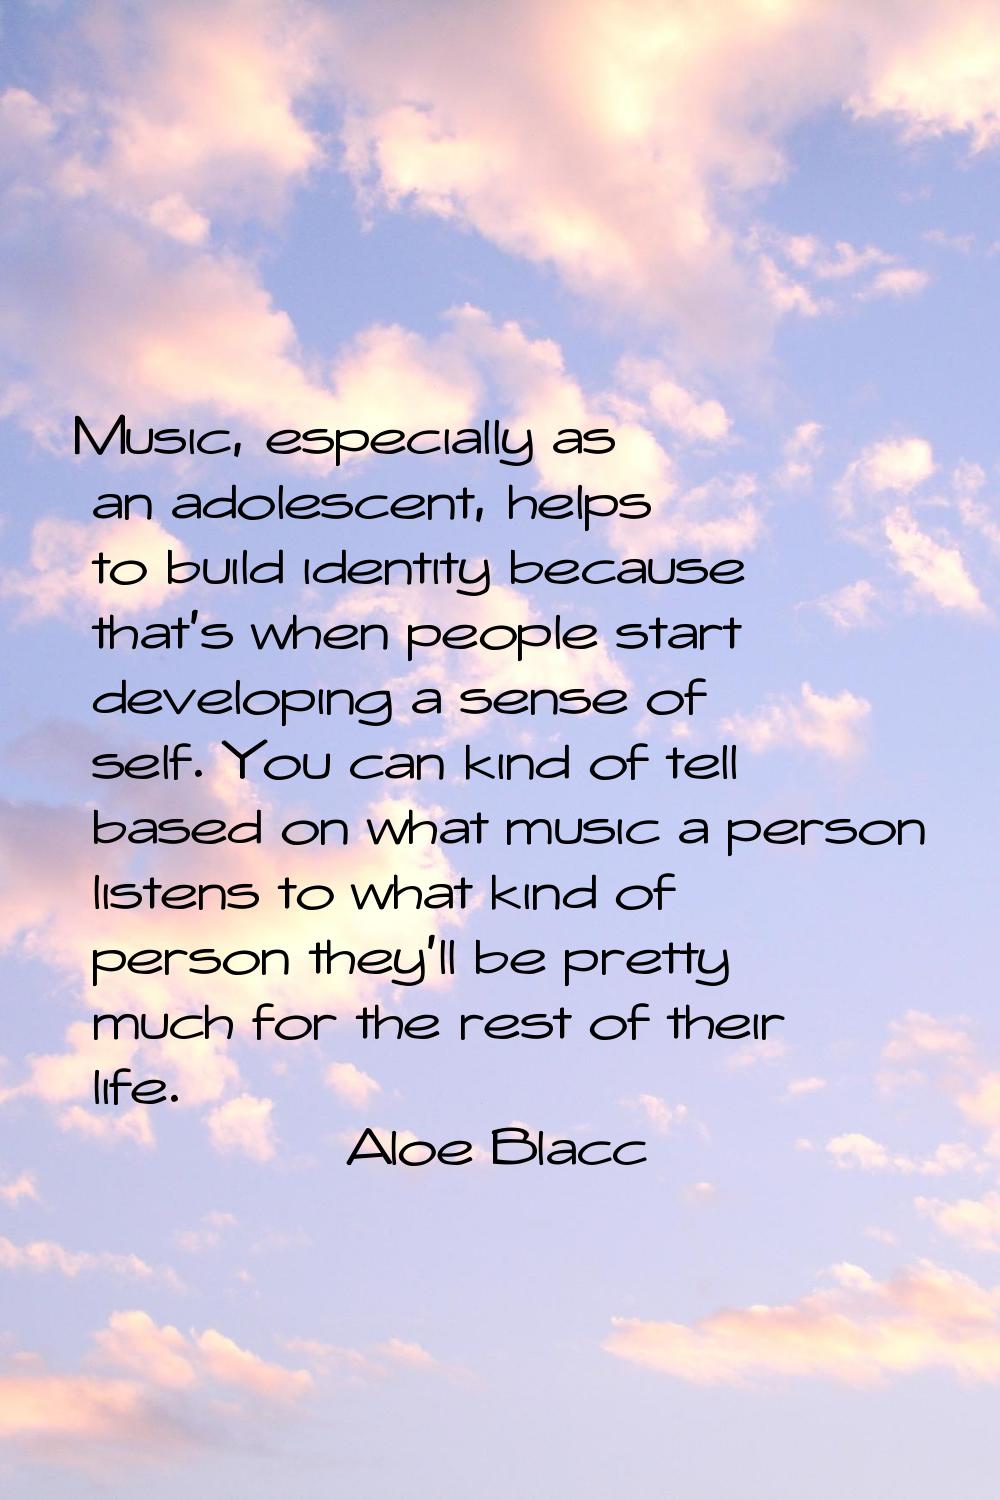 Music, especially as an adolescent, helps to build identity because that's when people start develo